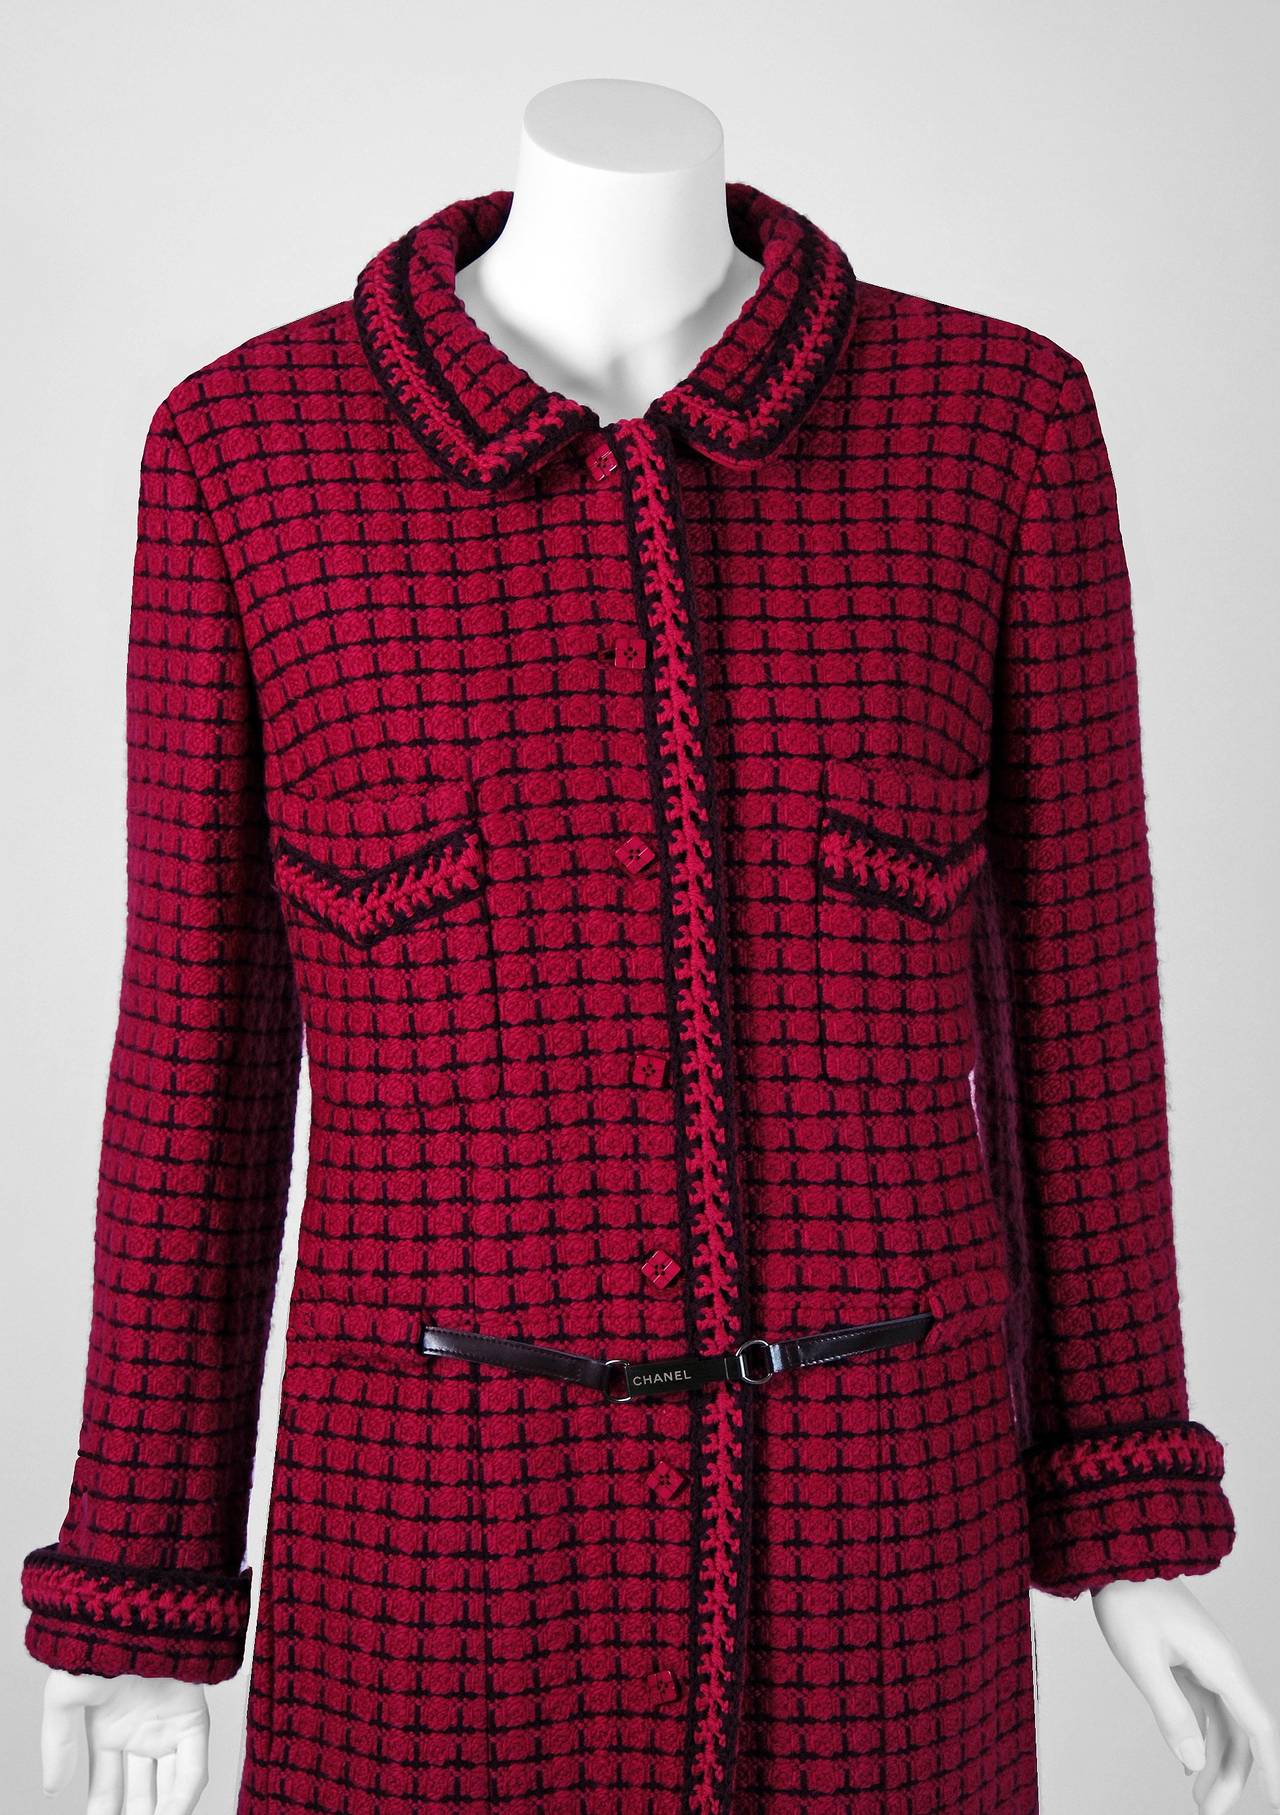 Chanel is known to be one of the most luxurious and decadent fashion houses in the world. This breathtaking raspberry & black plaid boucle-wool coat is a perfect example of why this couture brand has stood the test of time. Not only is this little